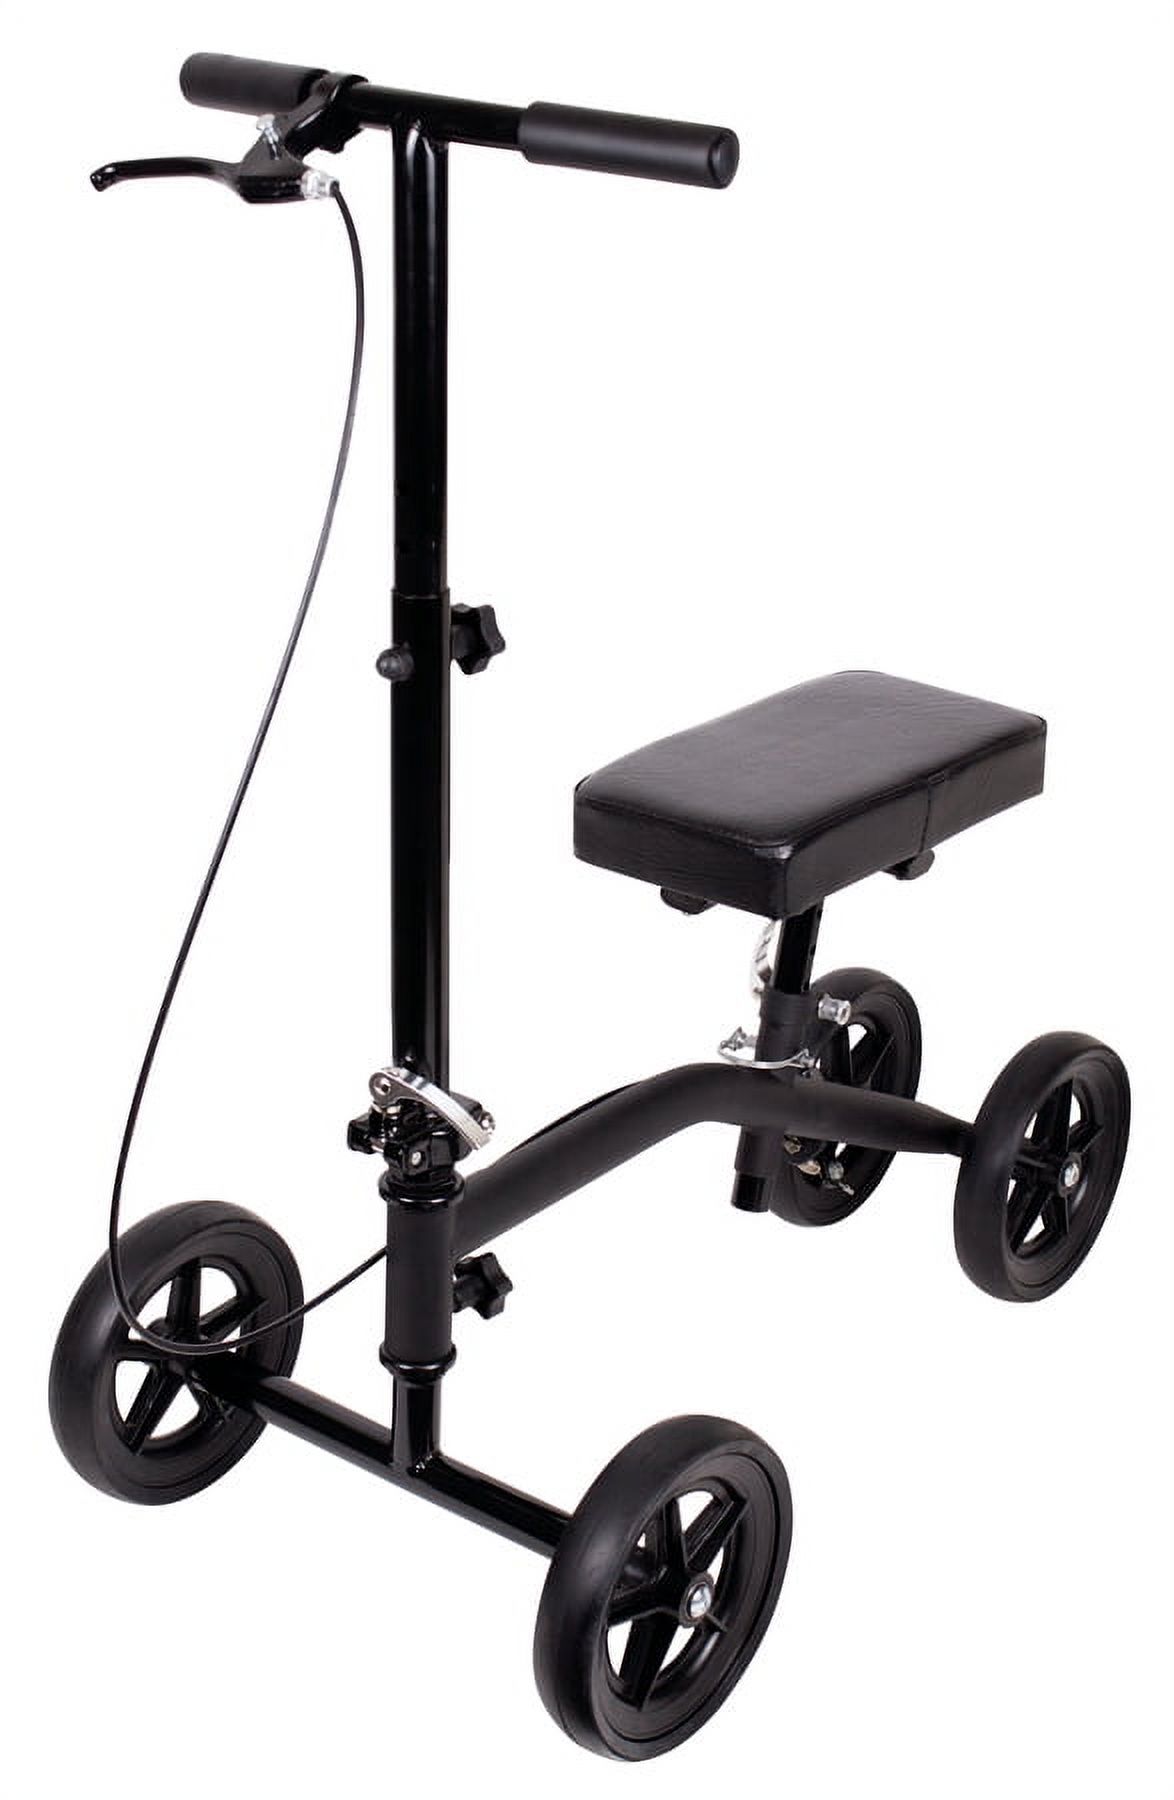 Carex Knee Scooter with Platform Pad, for Adults, Seniors, and Teens, Black, 250 lb Weight Capacity - image 1 of 3